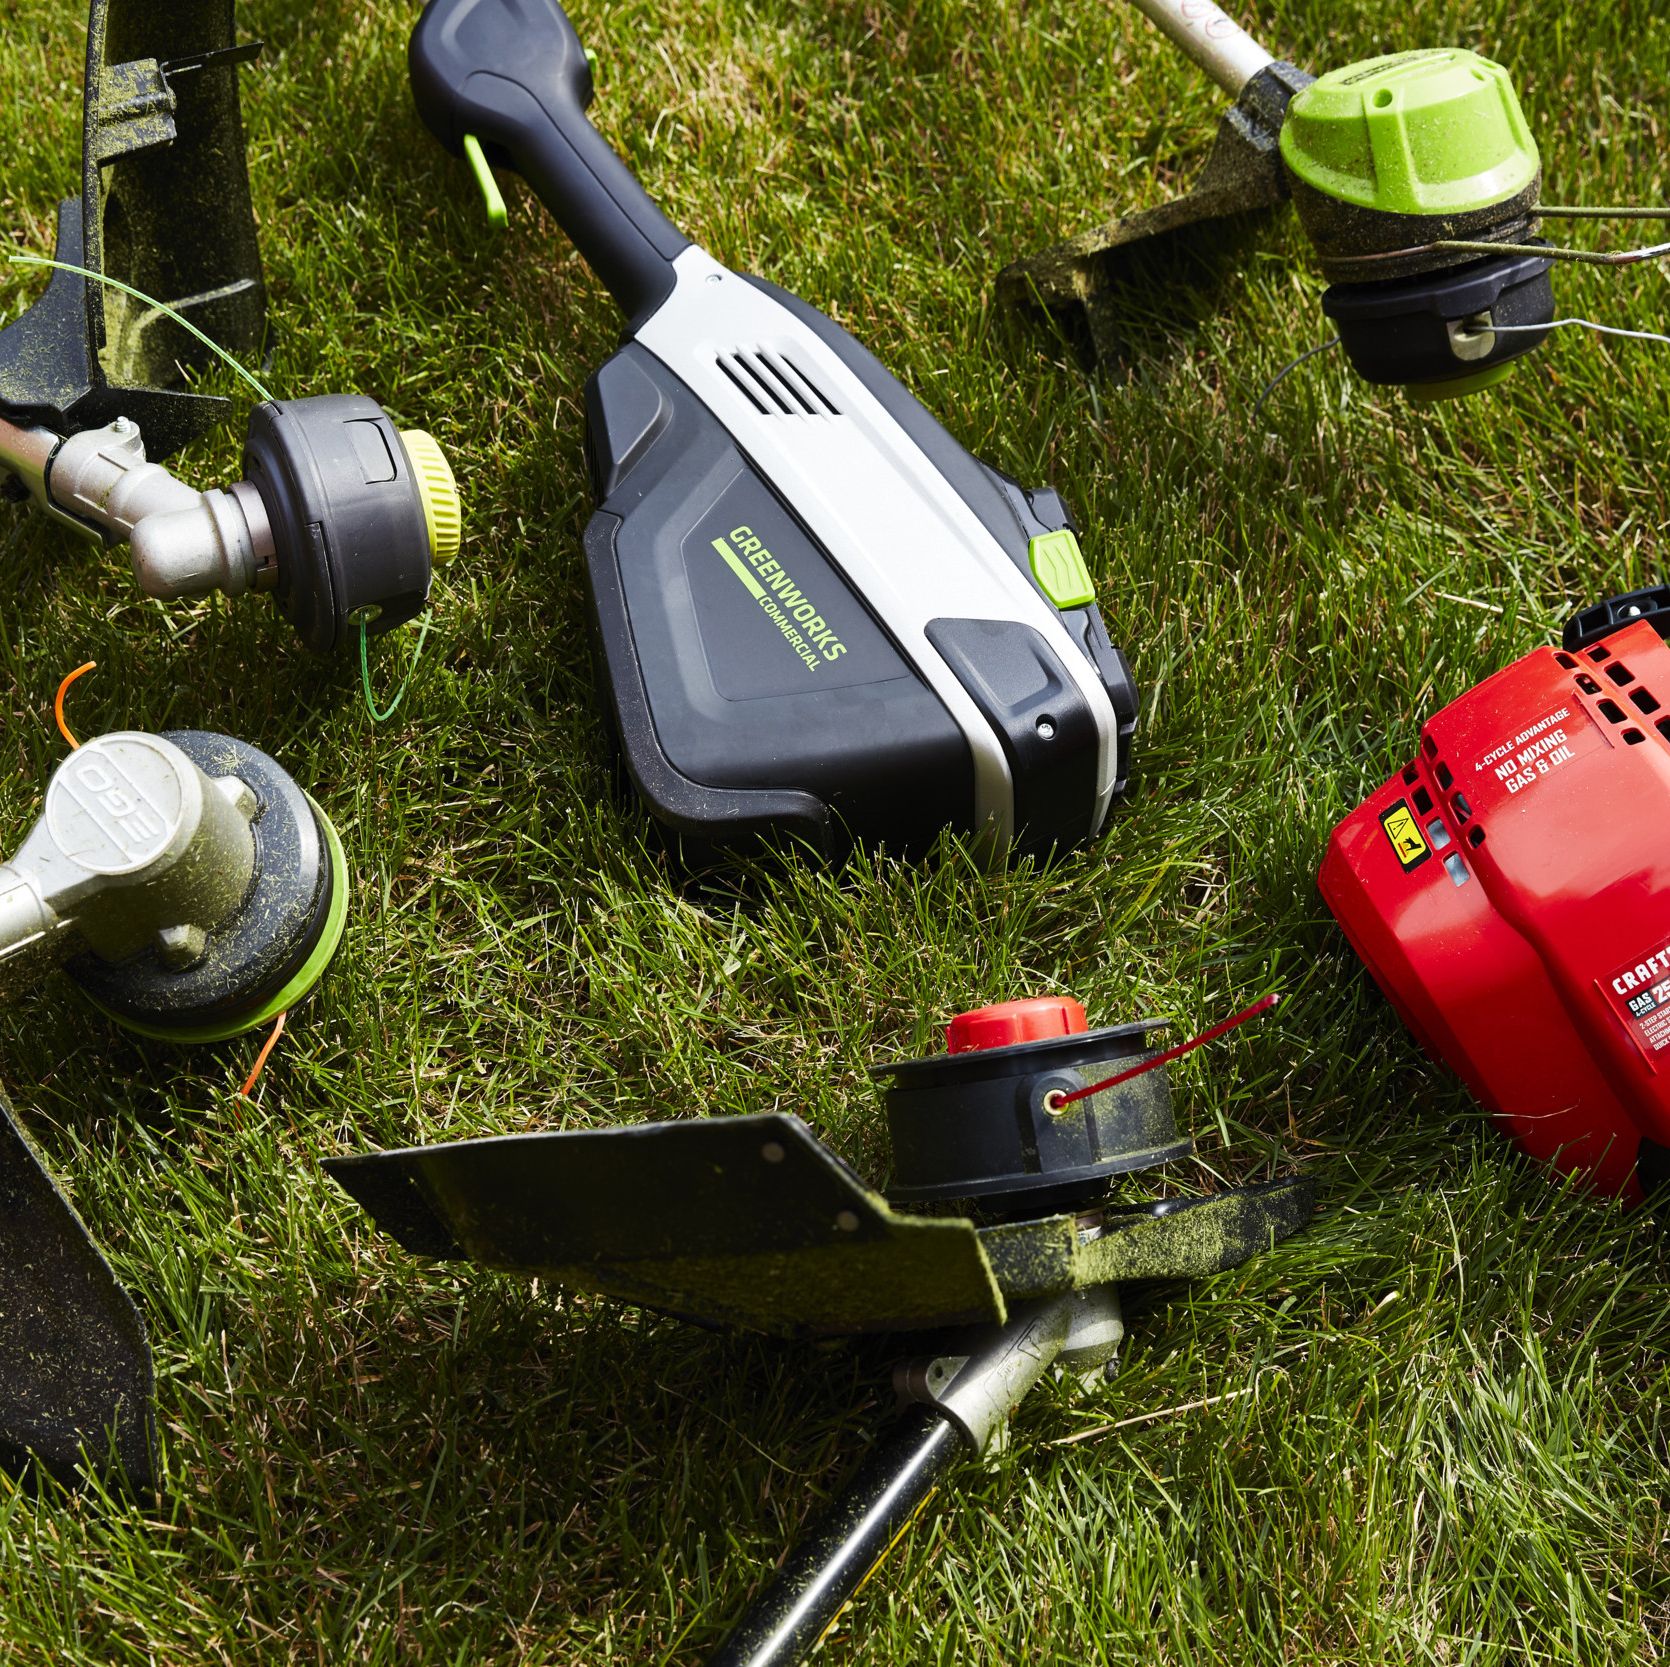 Keep Your Yard Looking Sharp With The Best String Trimmers, Tested and Approved